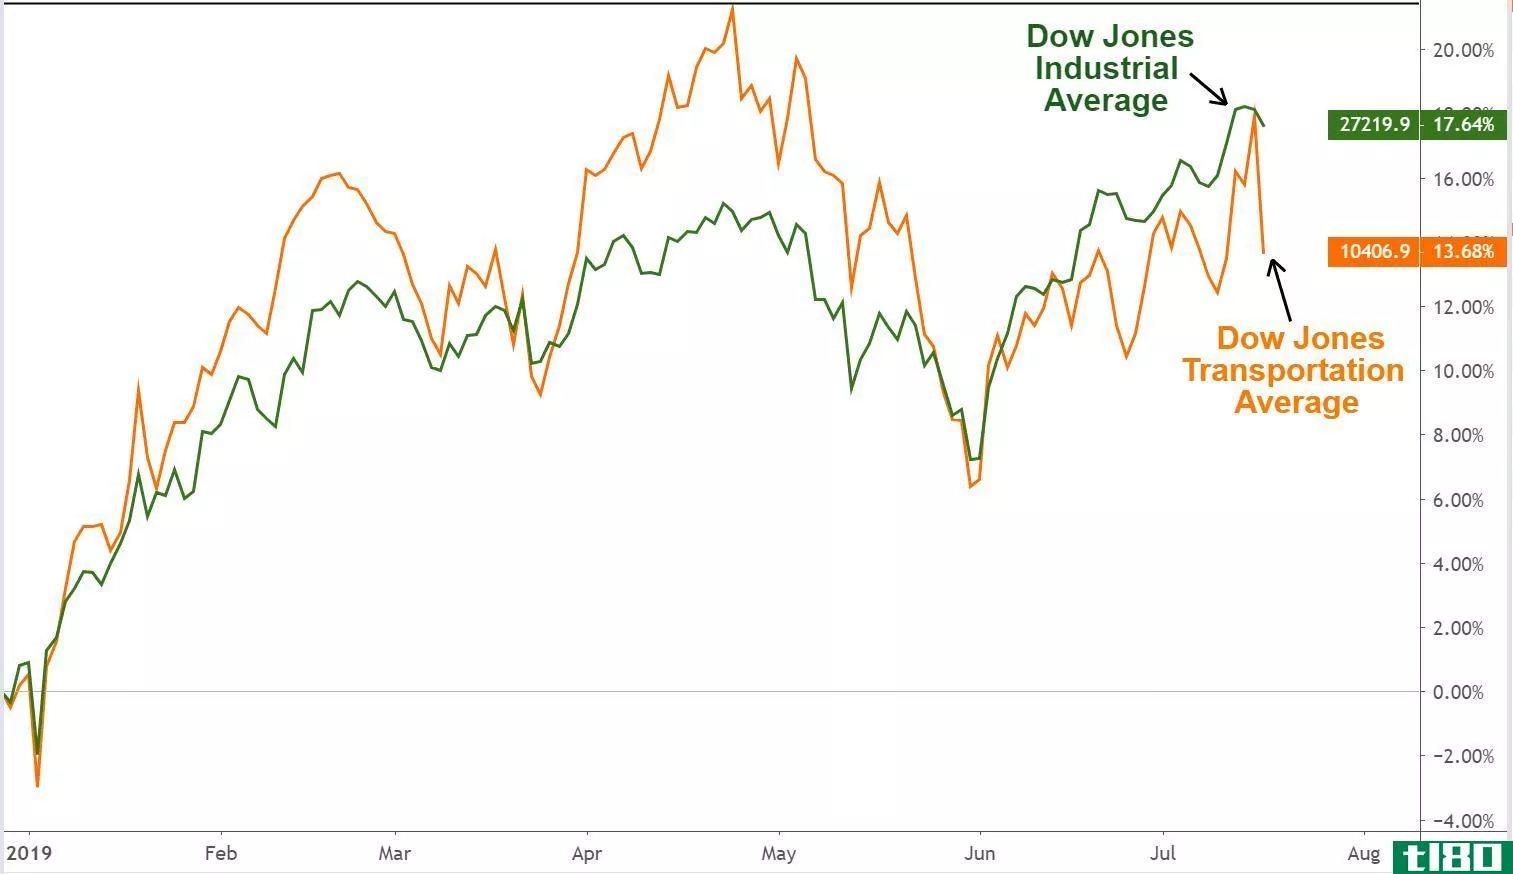 Chart showing the performance of the Dow Jones Industrial Average and Dow Jones Transportation Average